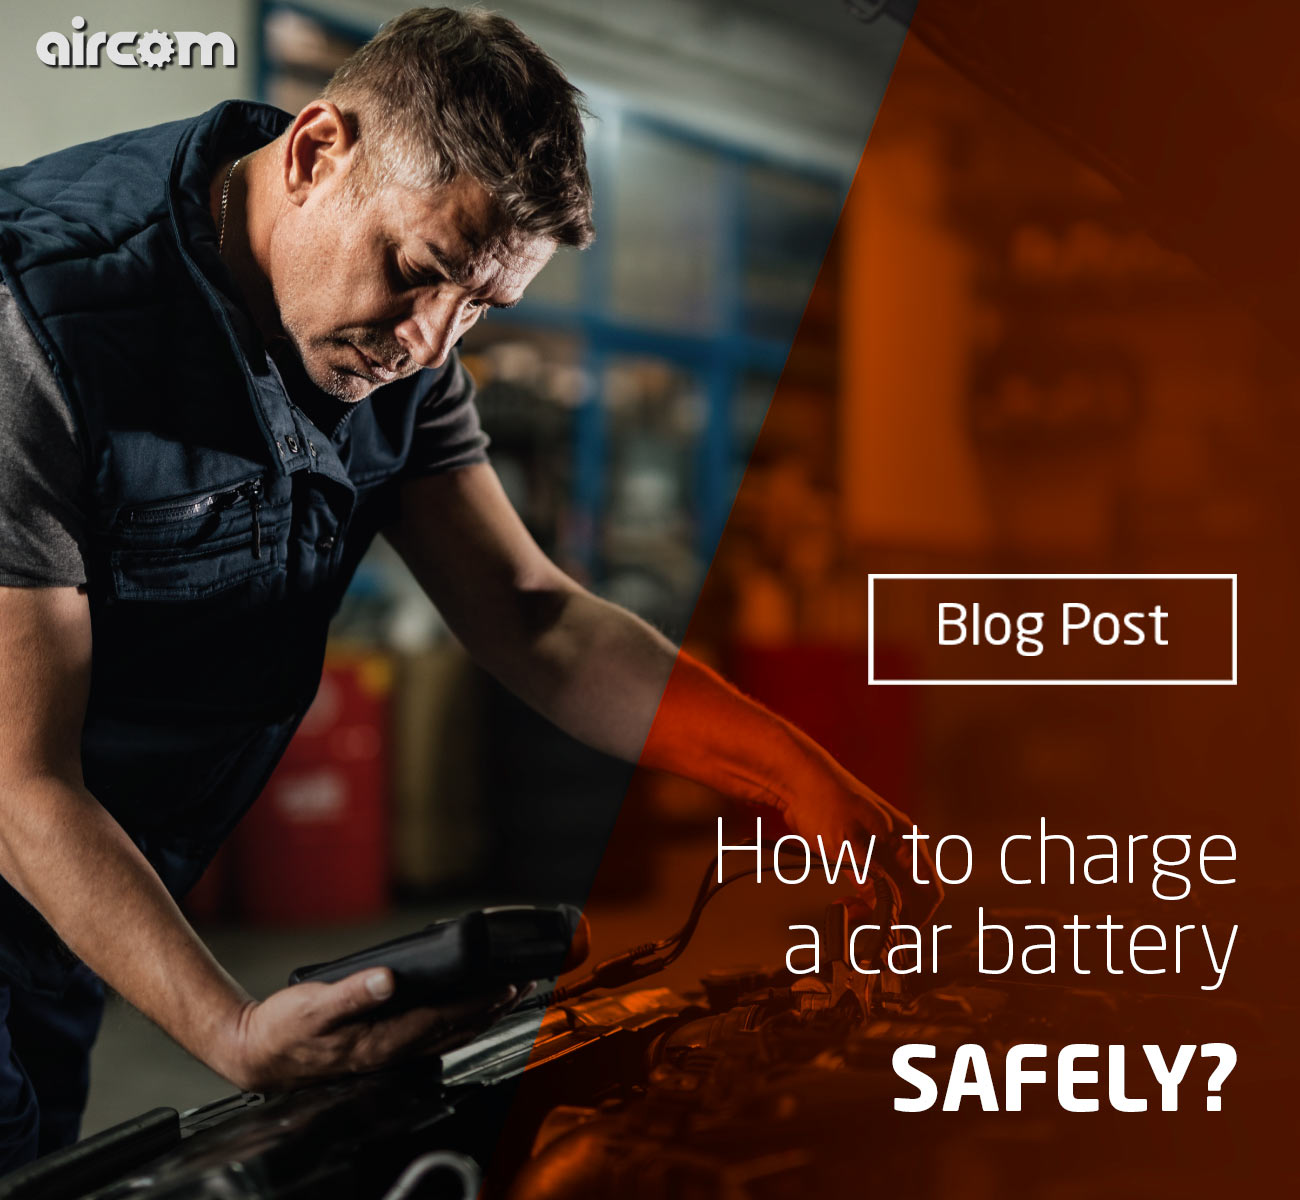 How to safely charge a car battery?